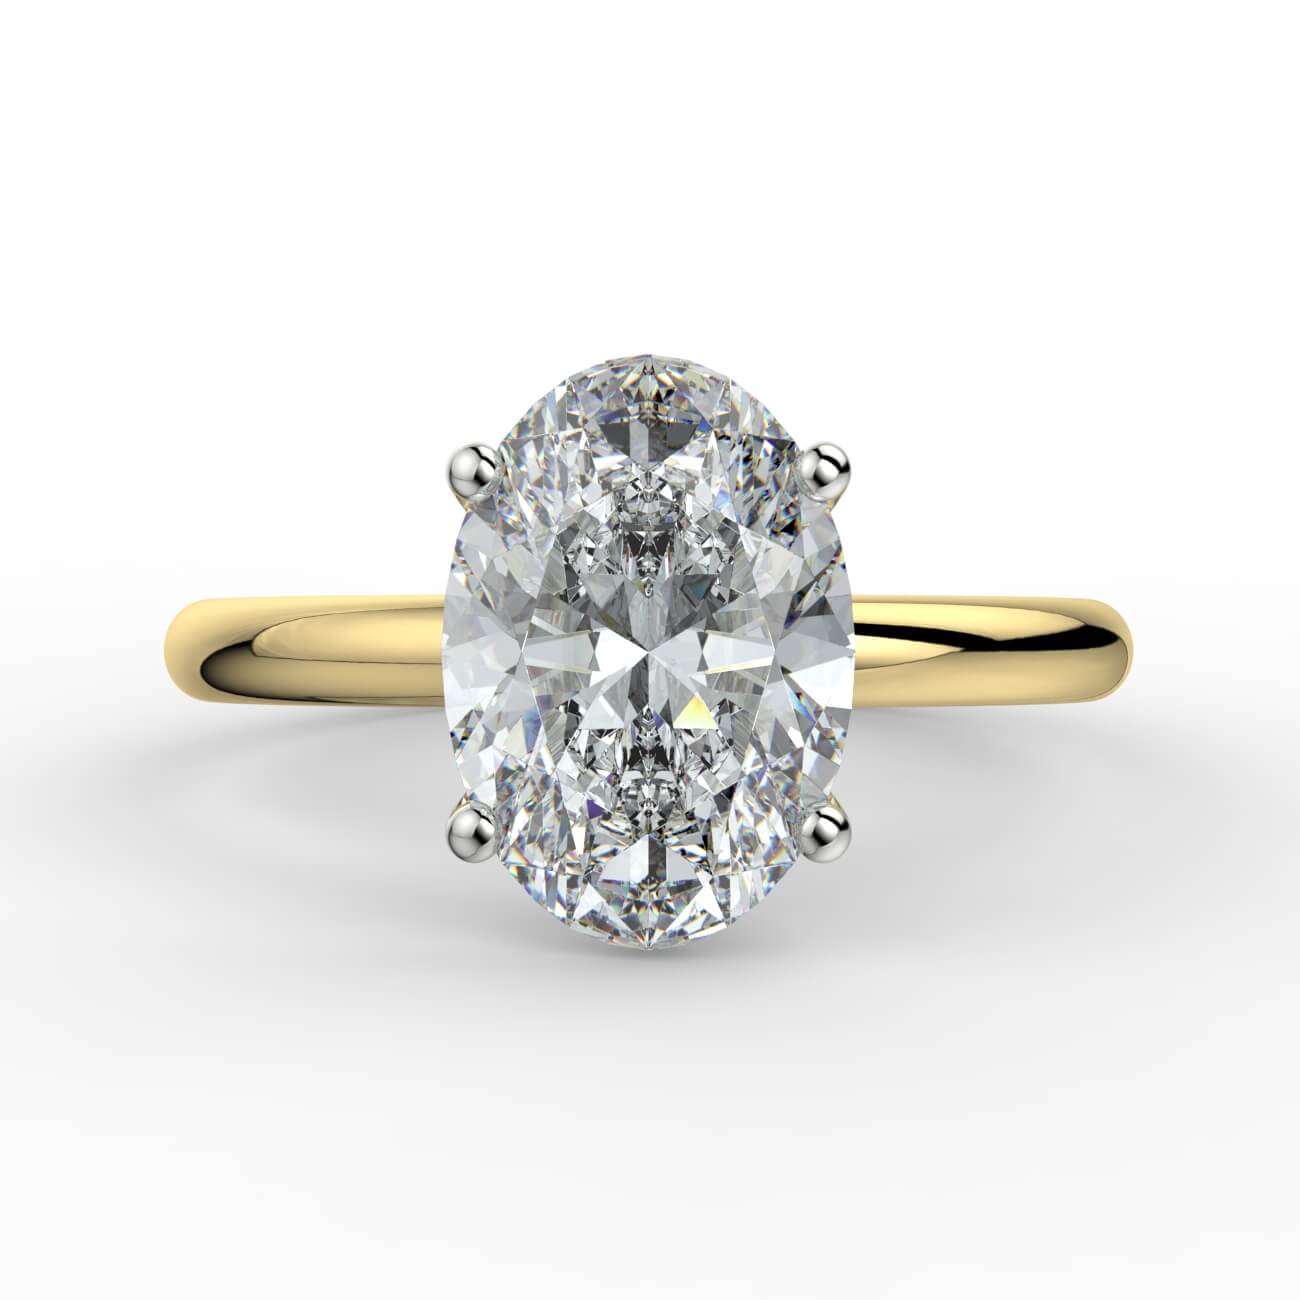 Solitaire oval diamond engagement ring in yellow and white gold – Australian Diamond Network